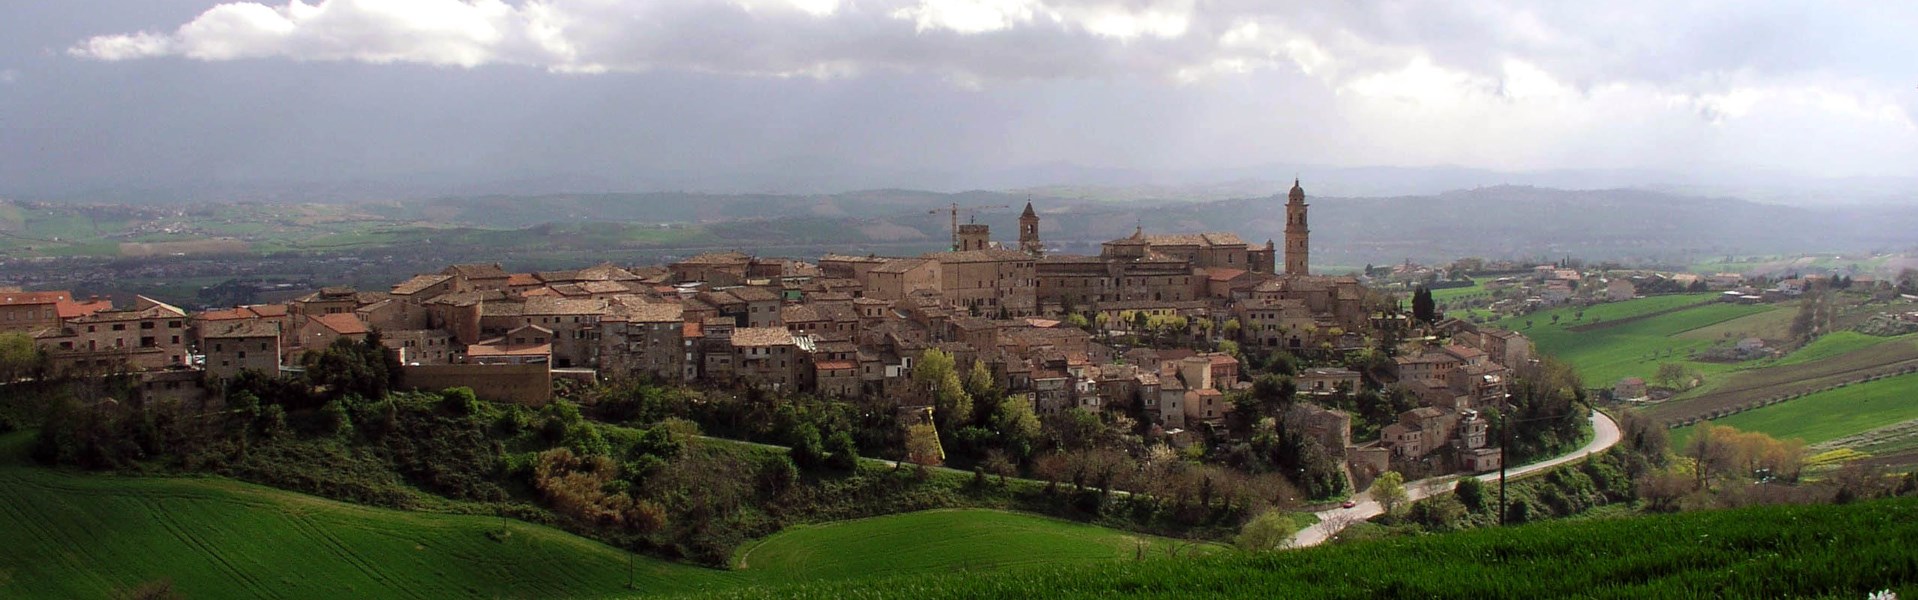 Morrovalle - Panorama